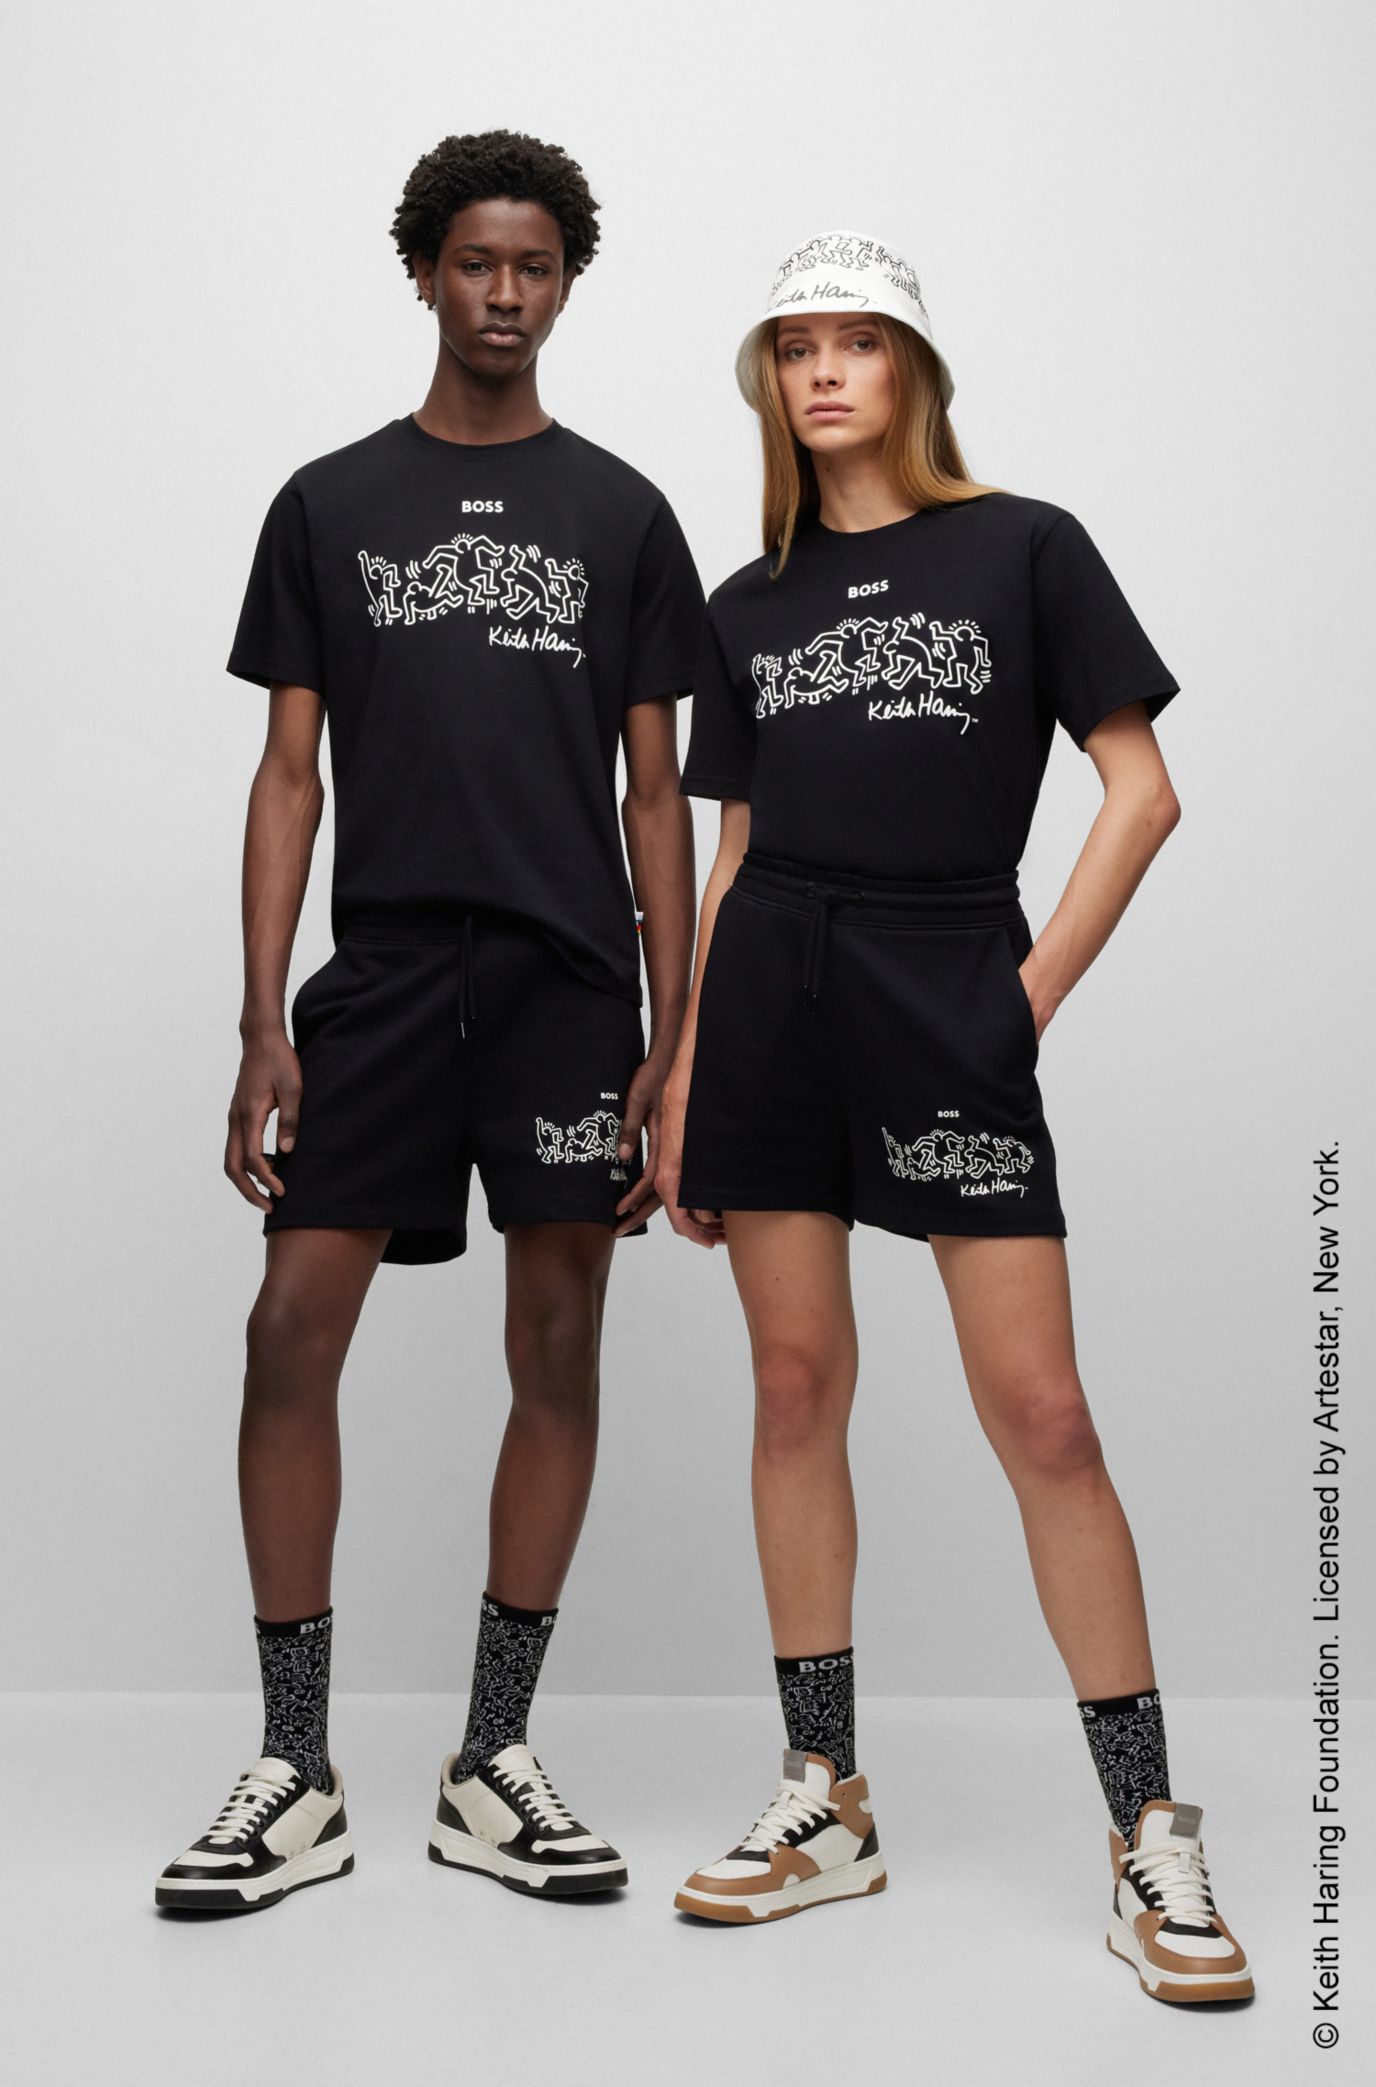 BOSS - BOSS x Keith Haring gender-neutral T-shirt with special